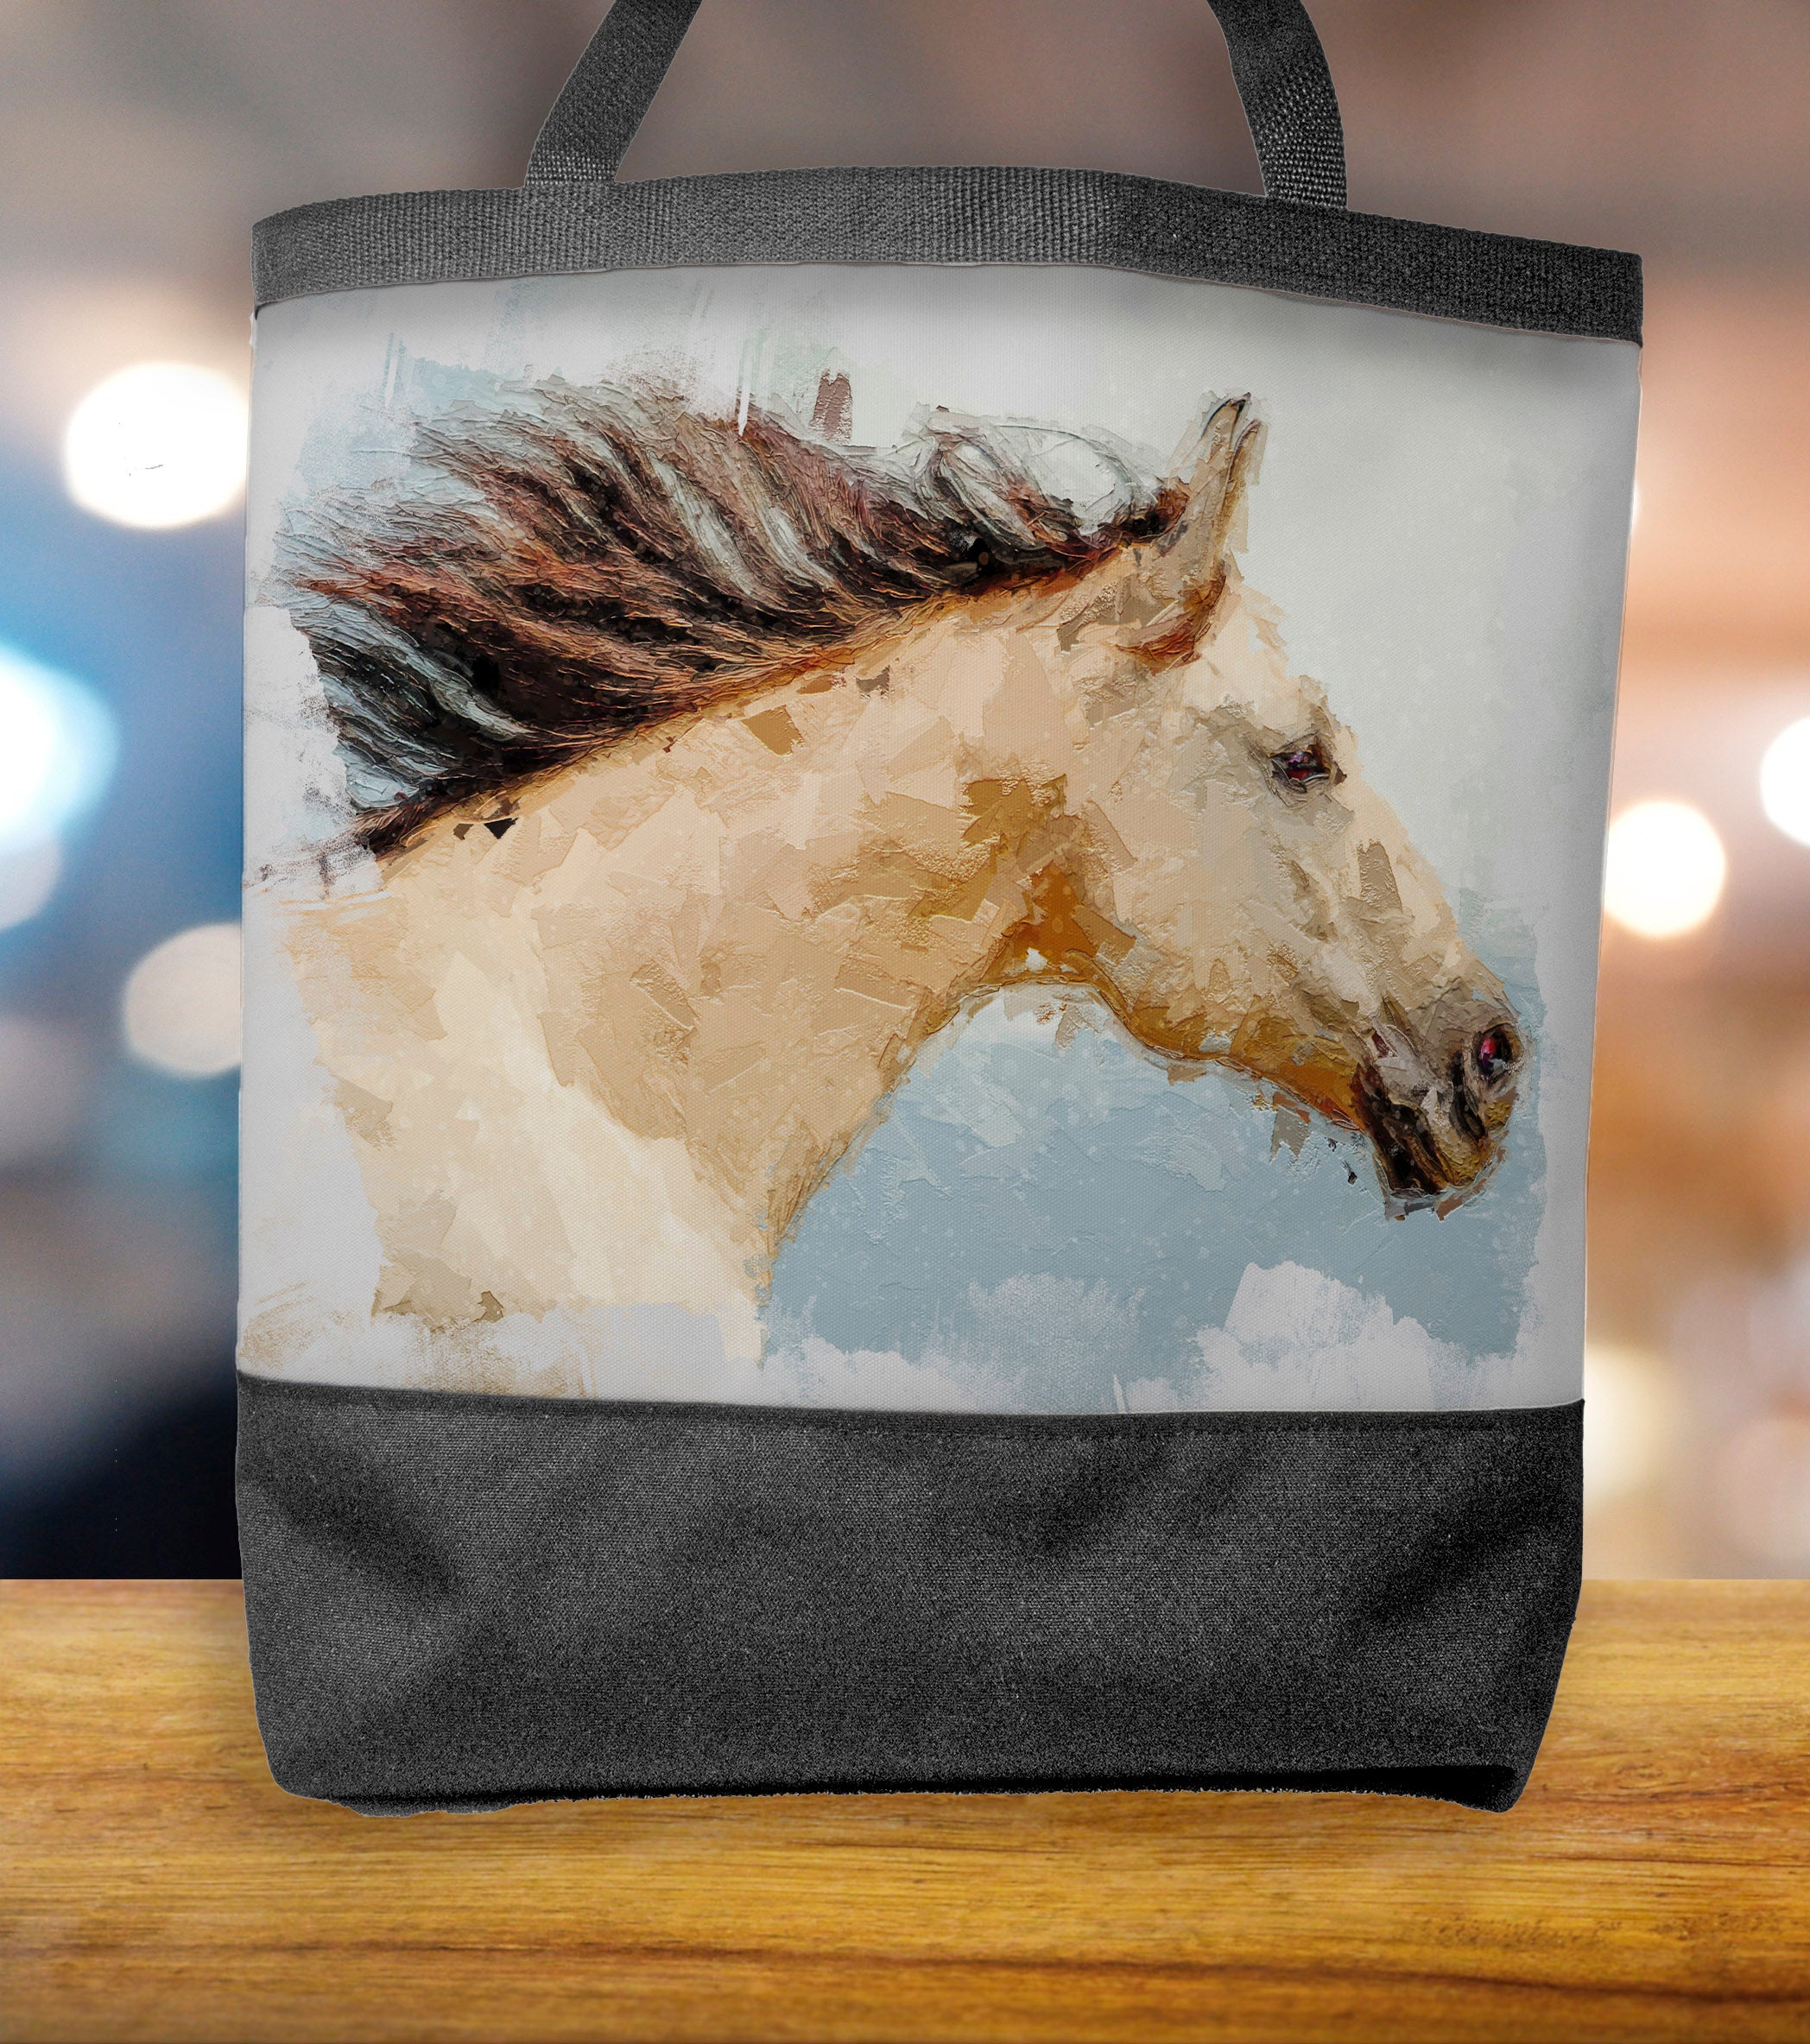 Horse Tote Bags